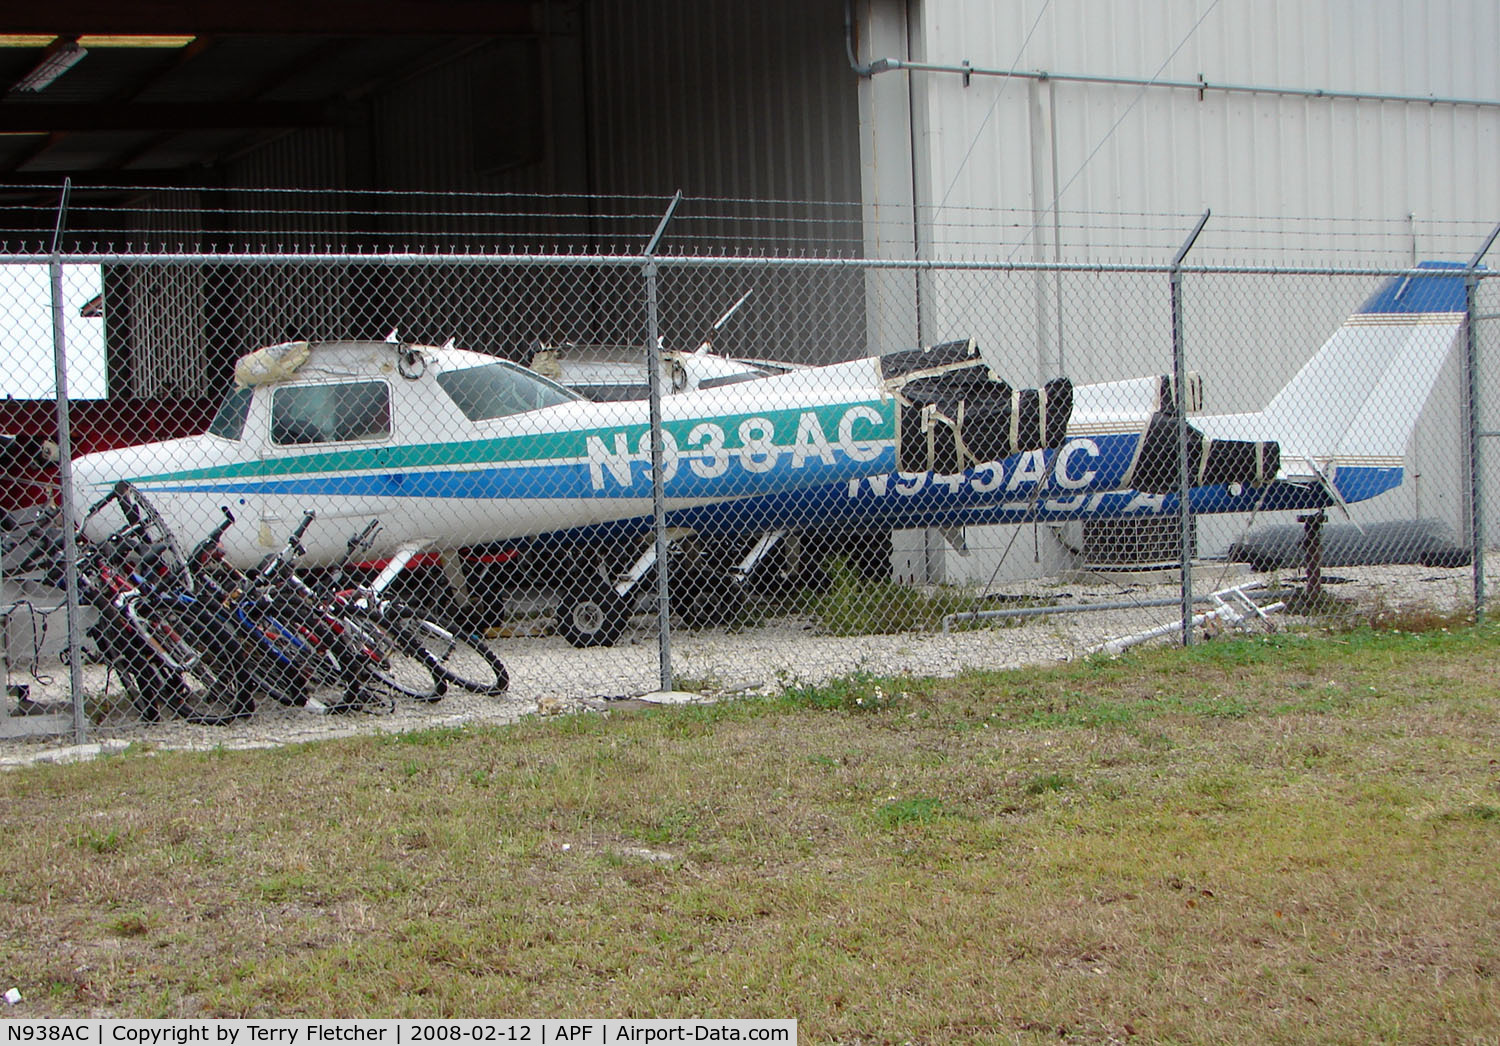 N938AC, 1982 Cessna 152 C/N 15285495, Looks like the end of the road for this Cessna and his two companions